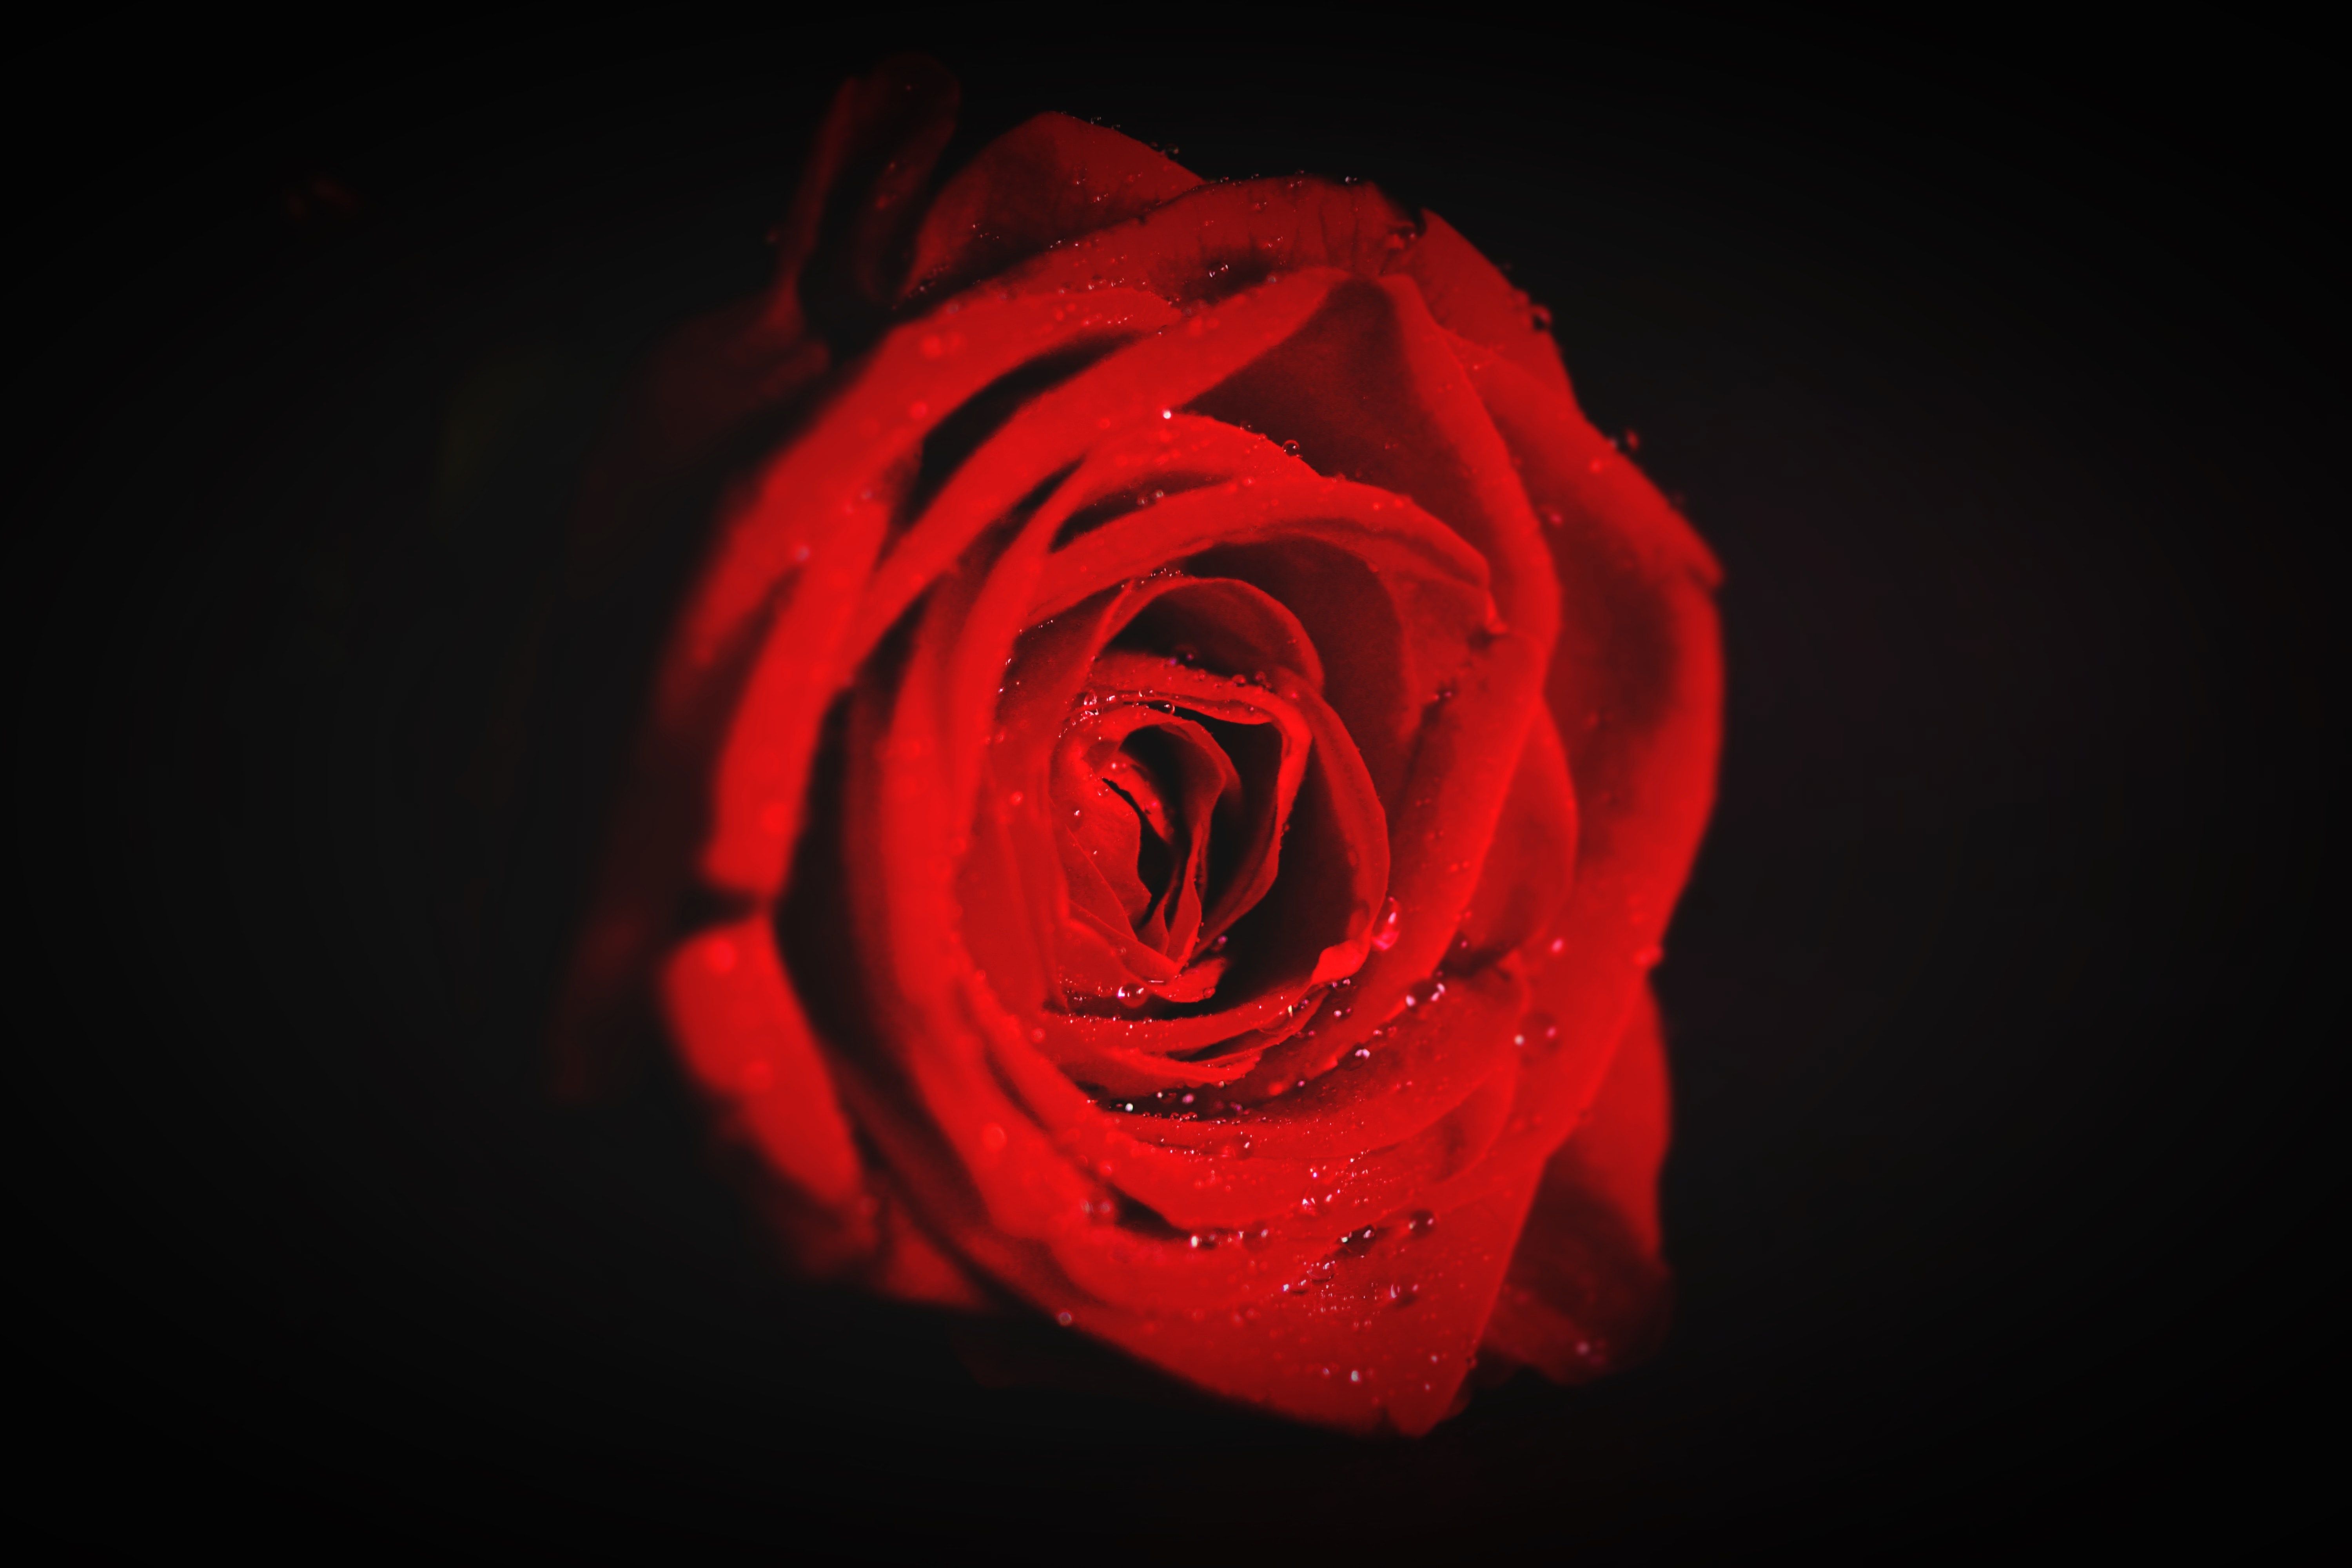 A close-up of a red rose with water droplets on it. - Roses